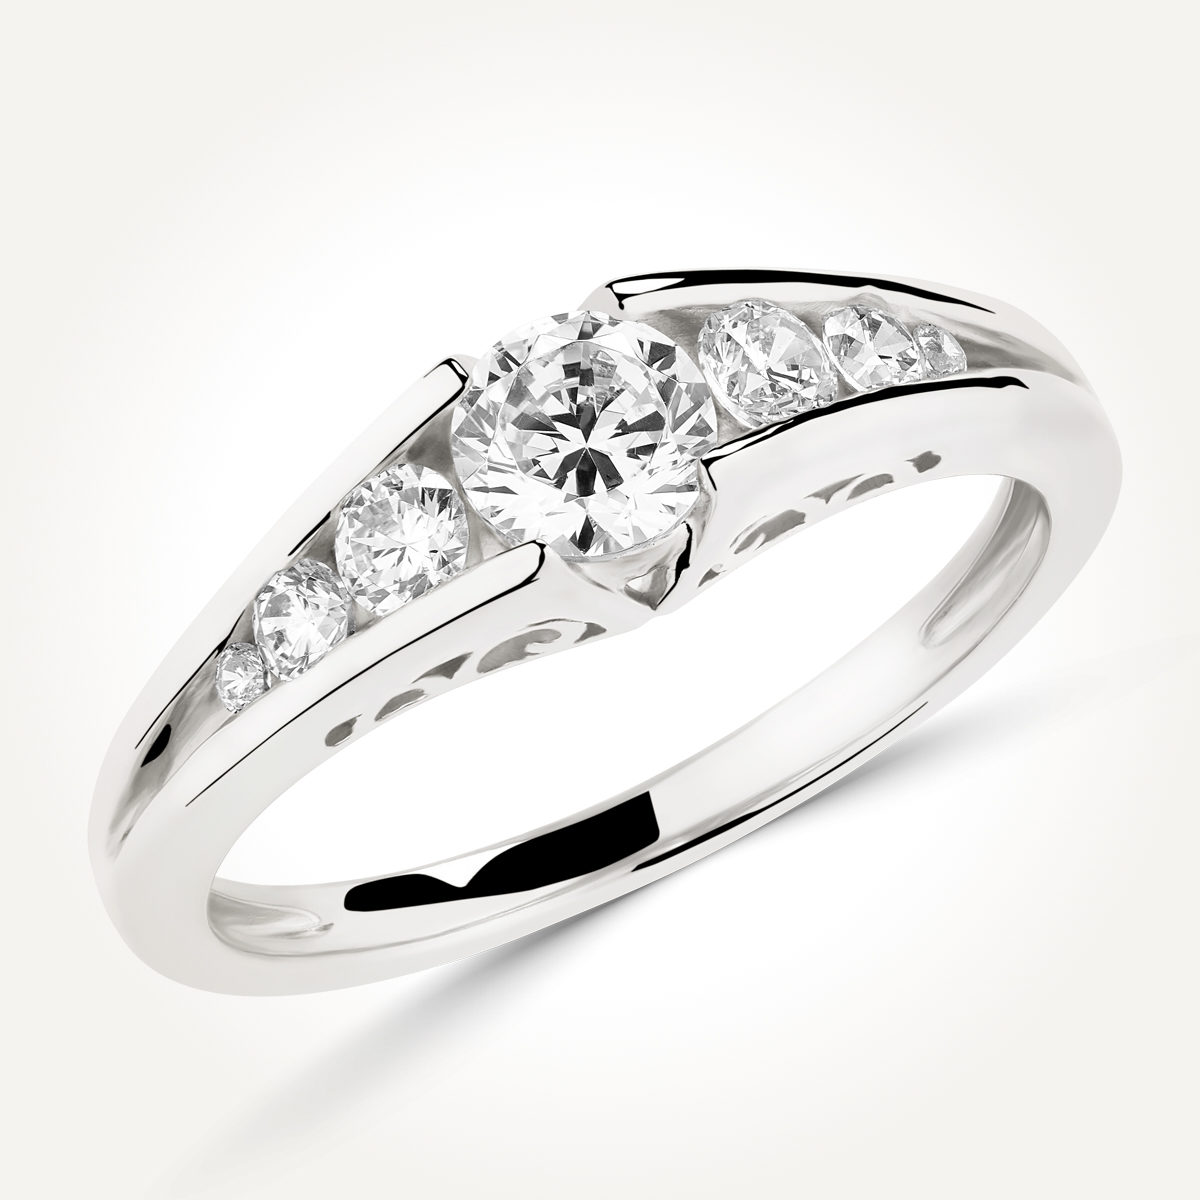 Multi Stone Engagement Ring - 7873 A